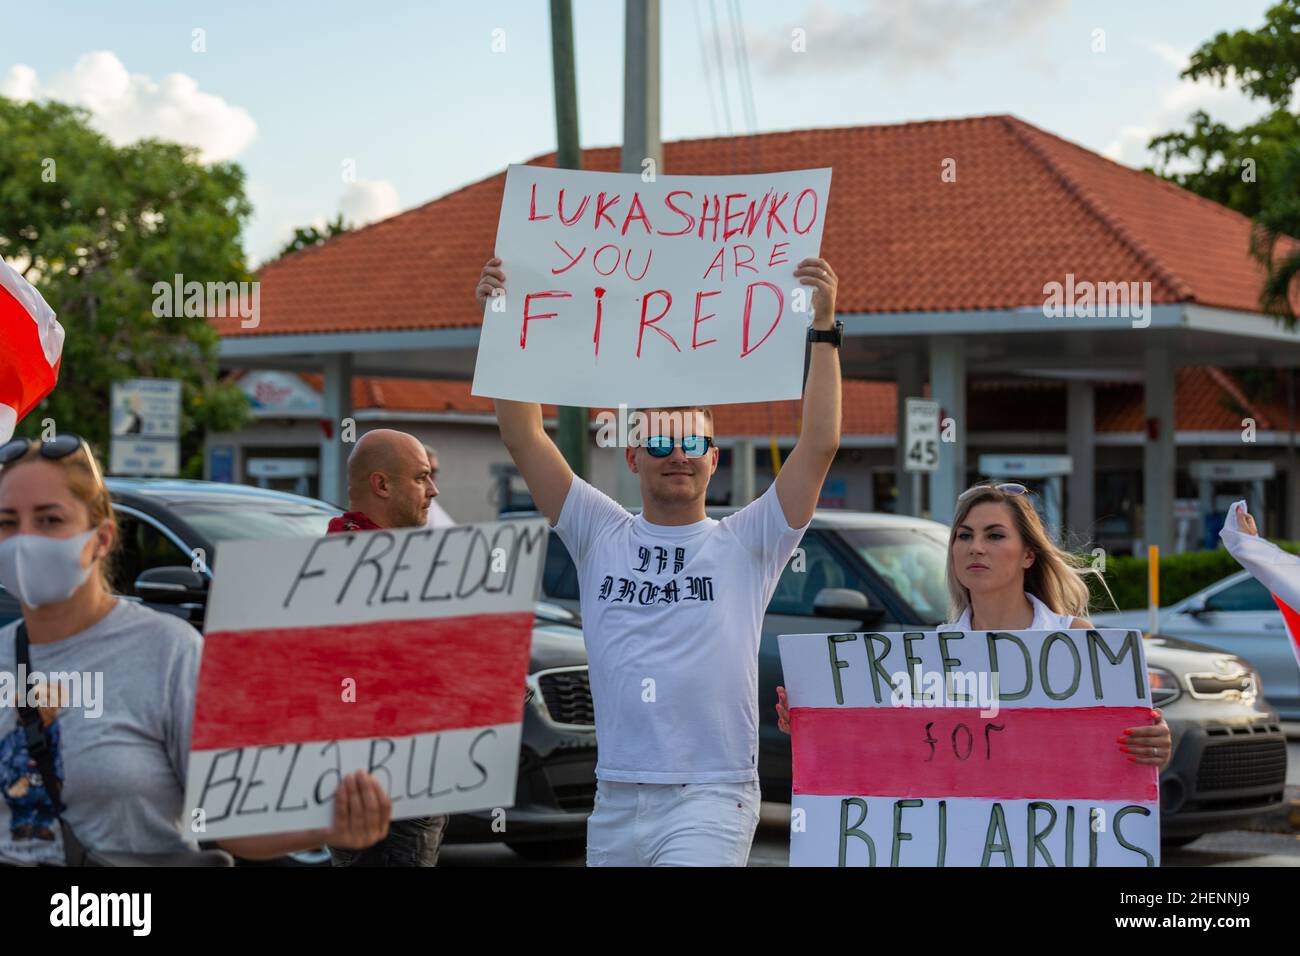 Belarus people at a protest against Lukashenko in Florida, USA. Signs for a fair election, freedom of political prisoners at Belarus. Protesters. Stock Photo